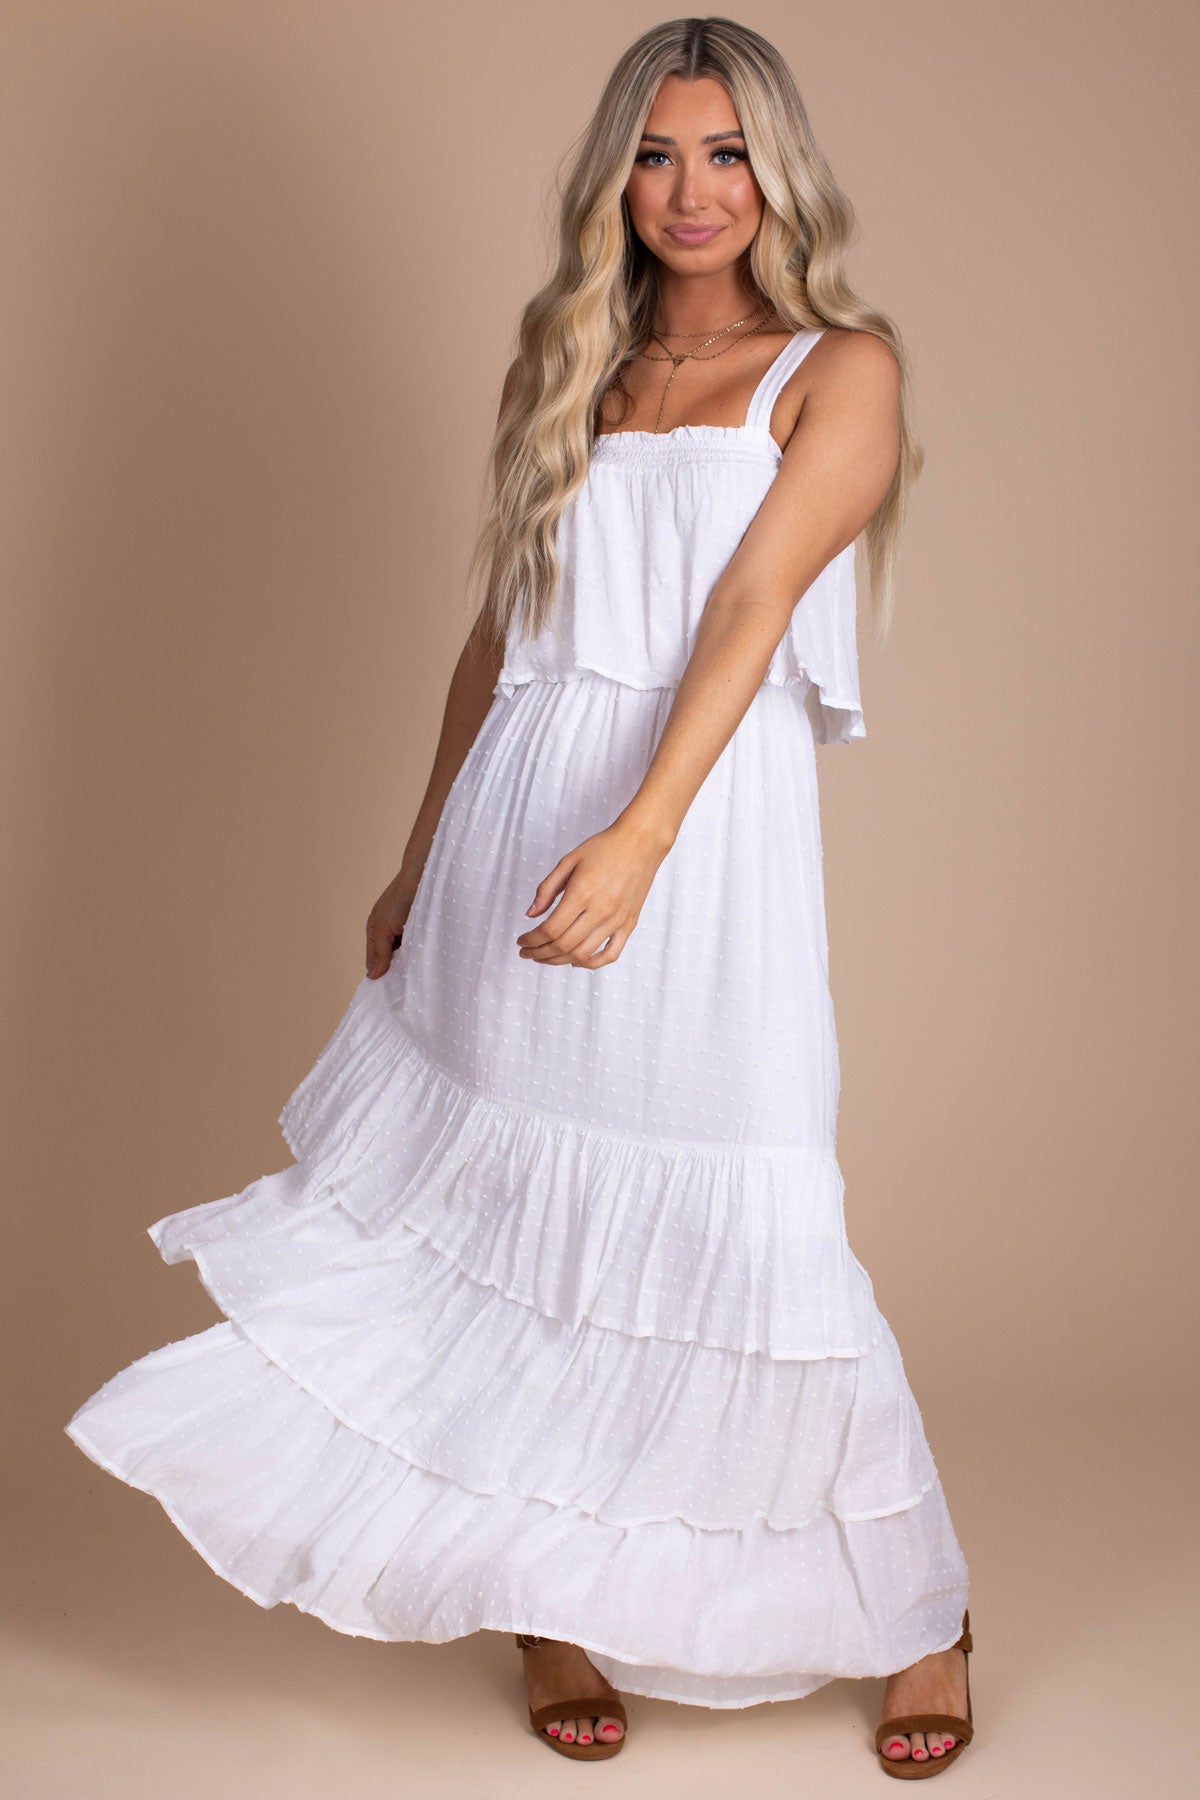 White Dress for Women with Tiered Skirt